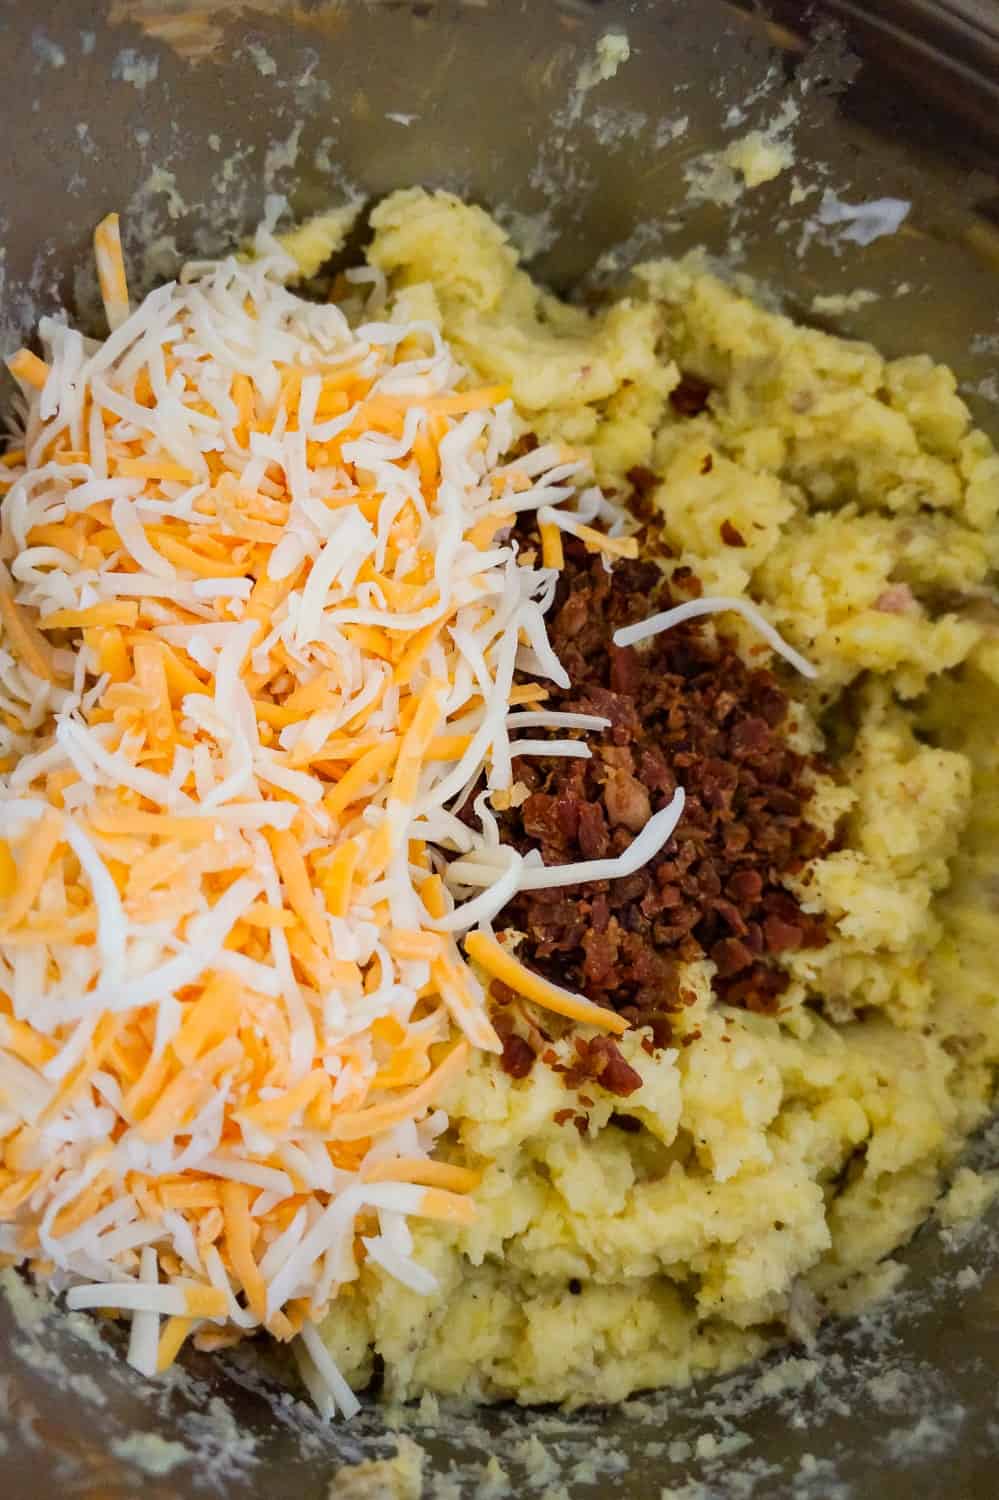 shredded cheddar, mozzarella and crumbled bacon on top of mashed potatoes in an Instant Pot